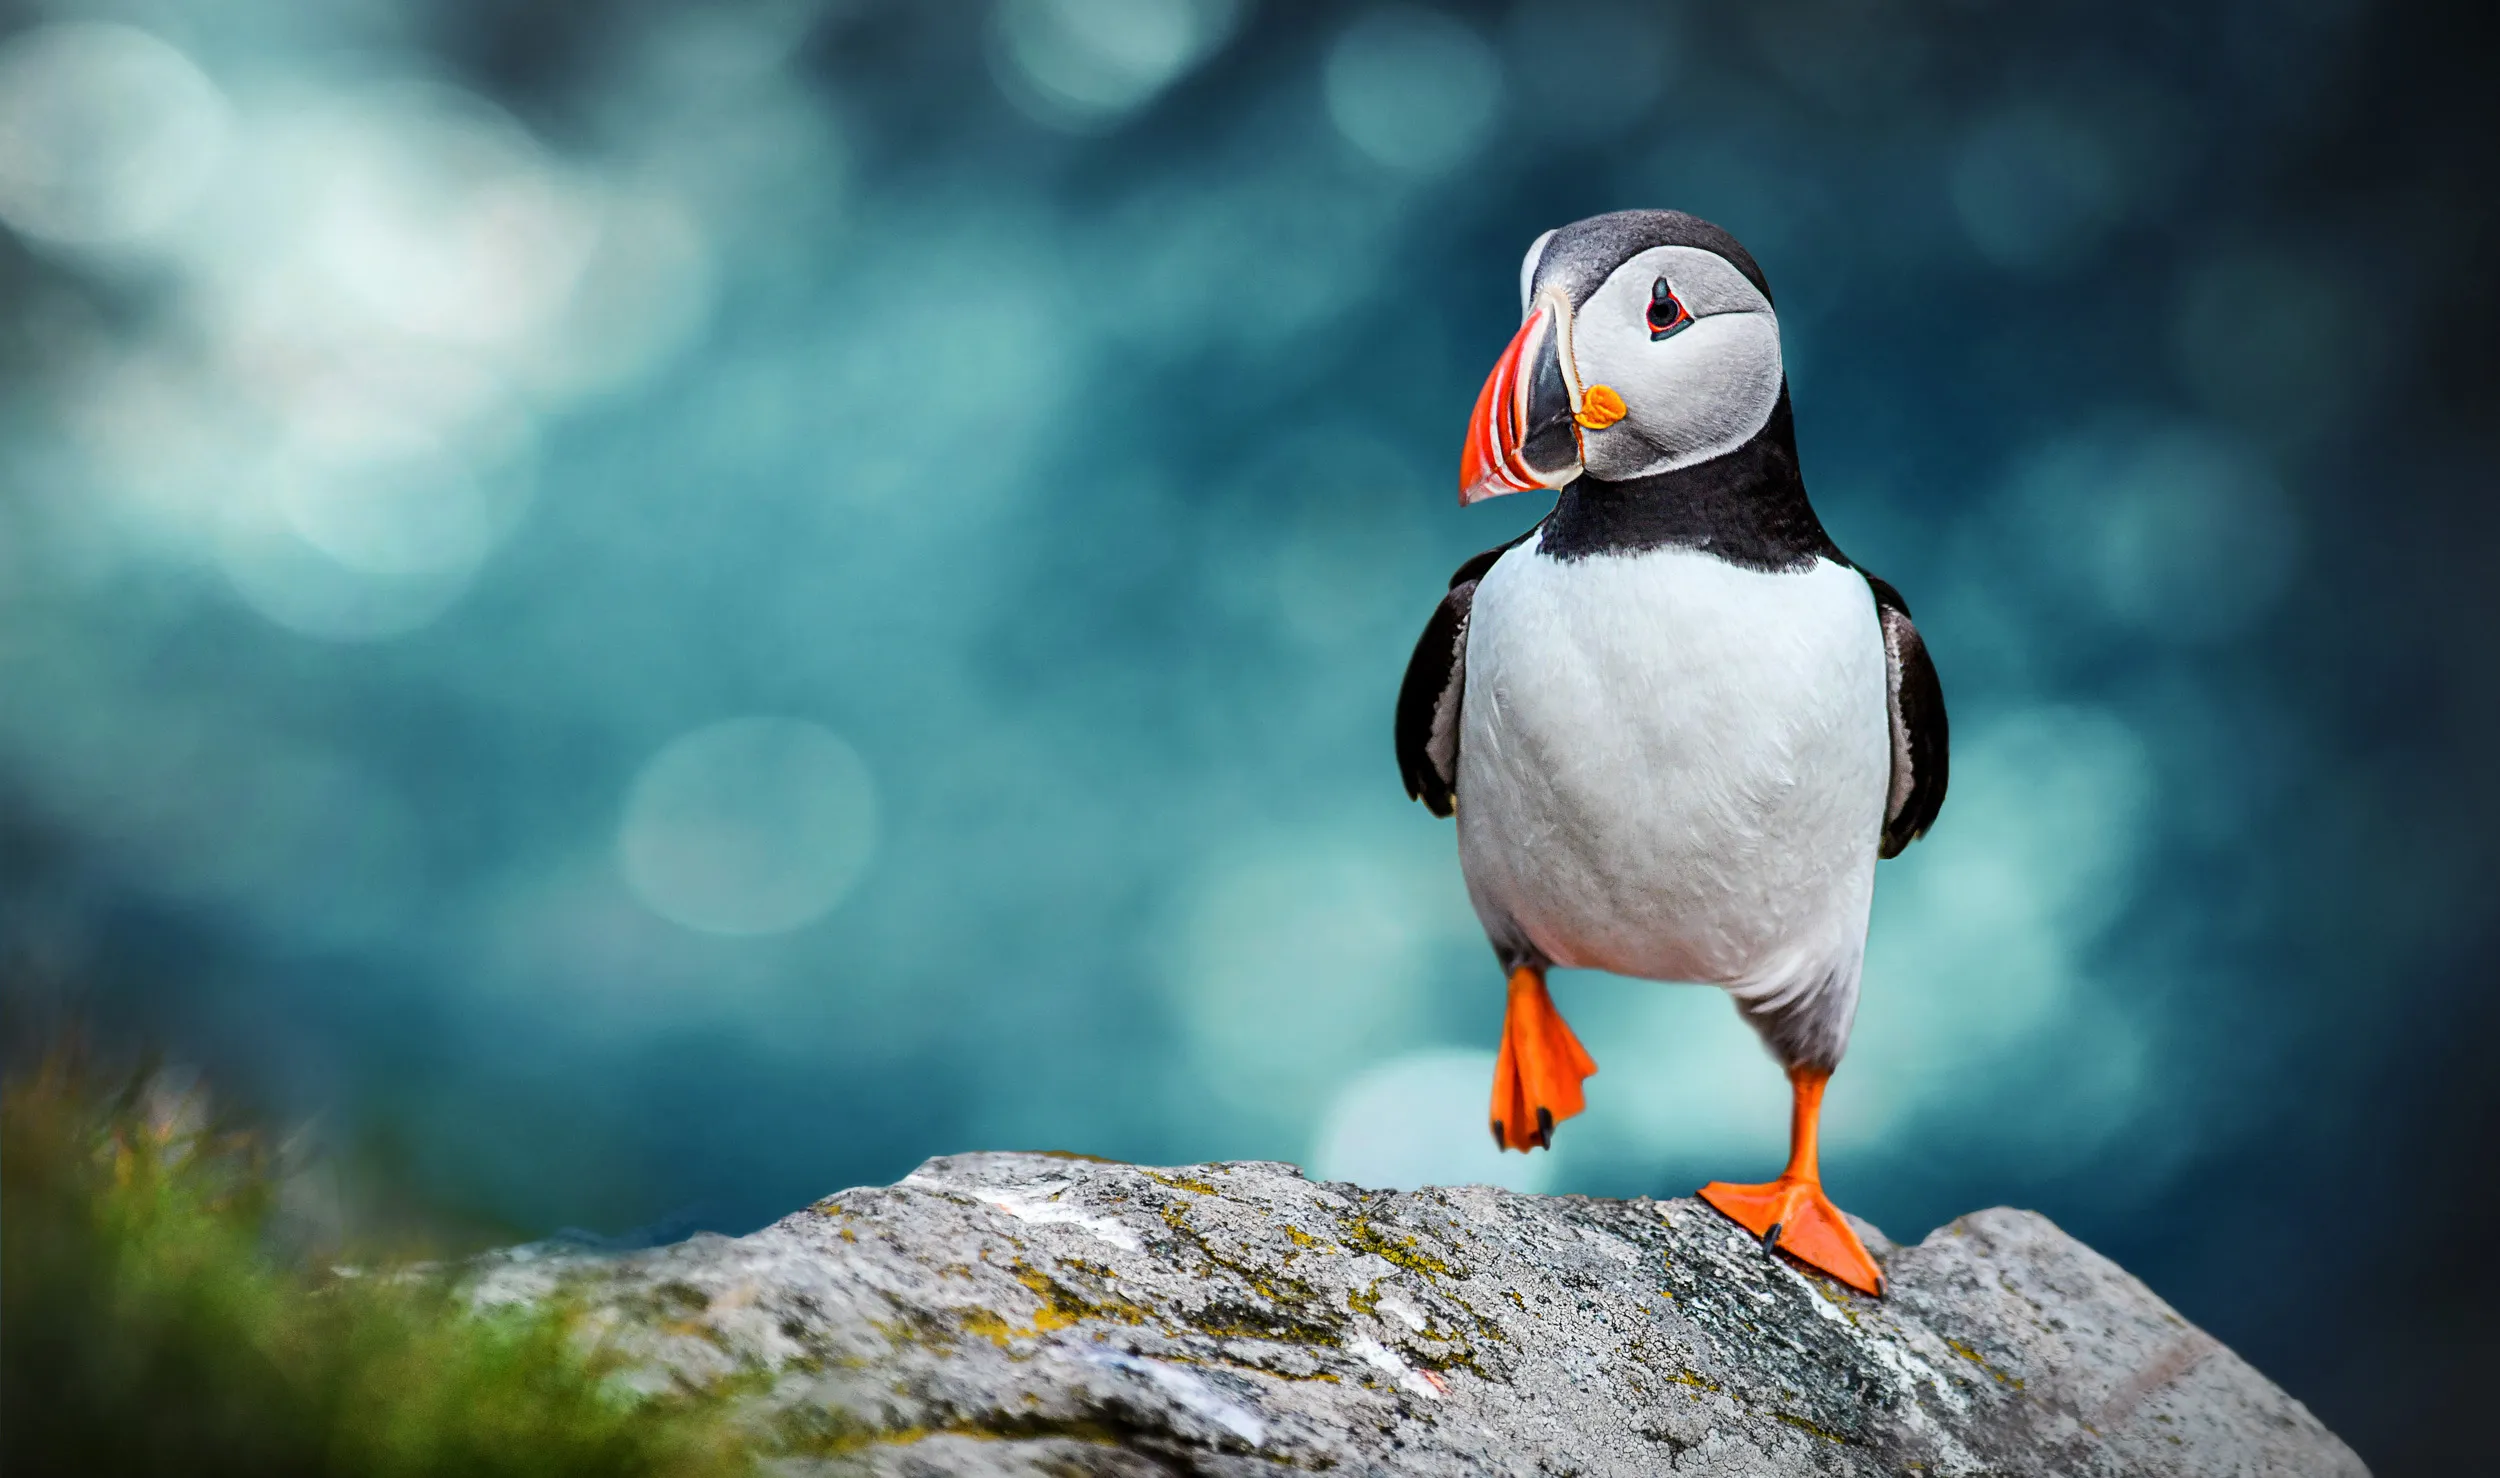 A lone adult Puffin in summer plumage stood on a rock by the ocean.